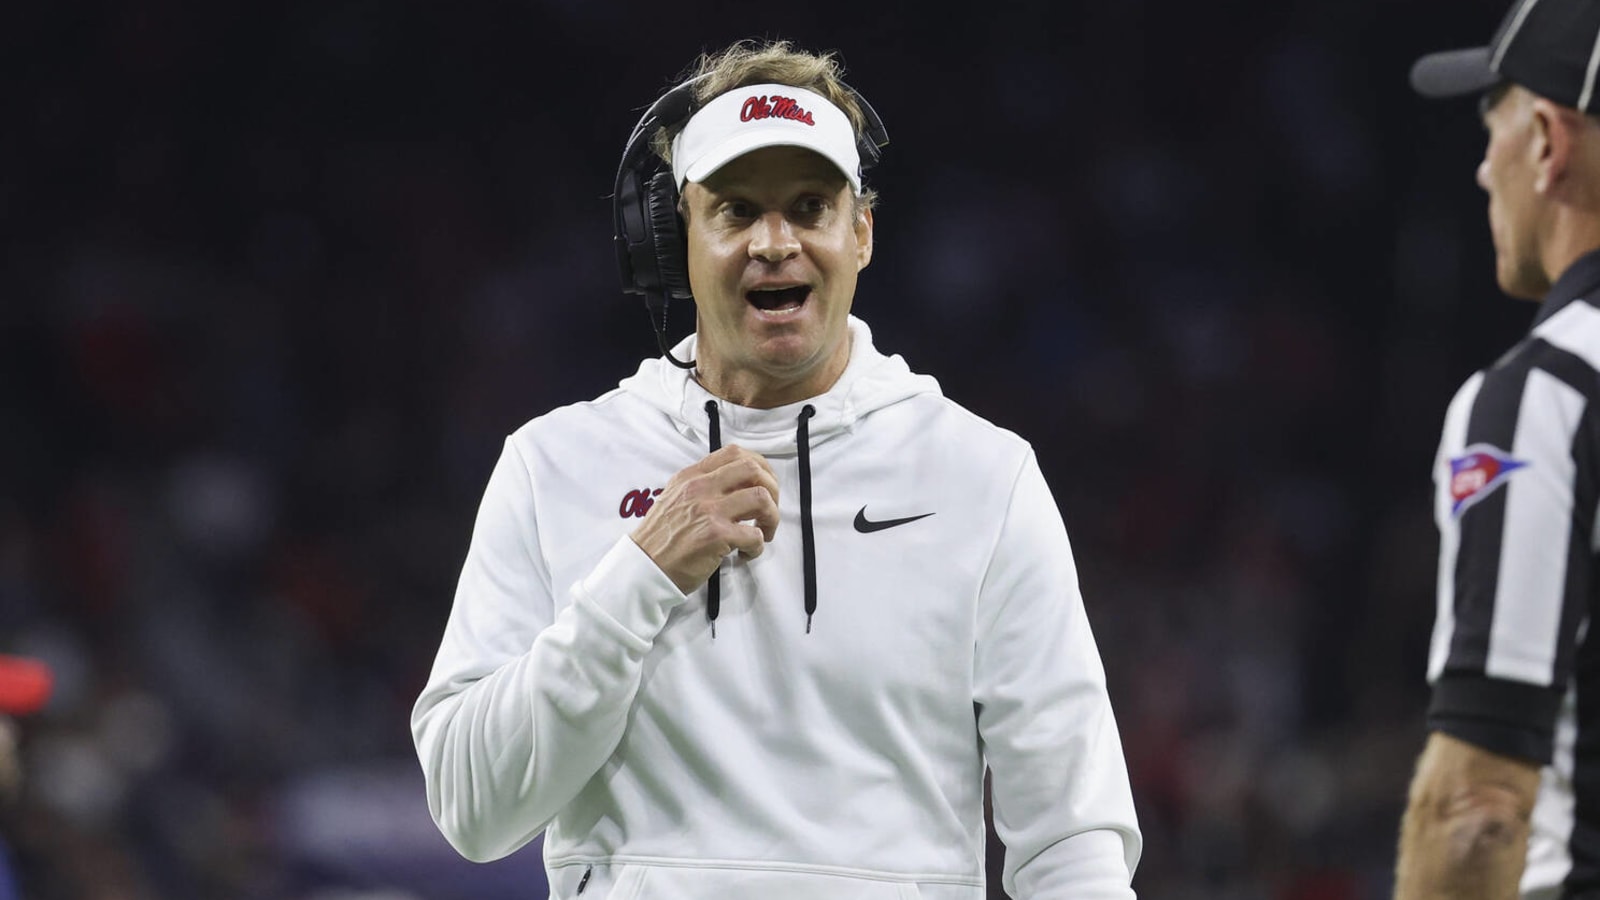 Lane Kiffin makes strong claims against Texas Tech player